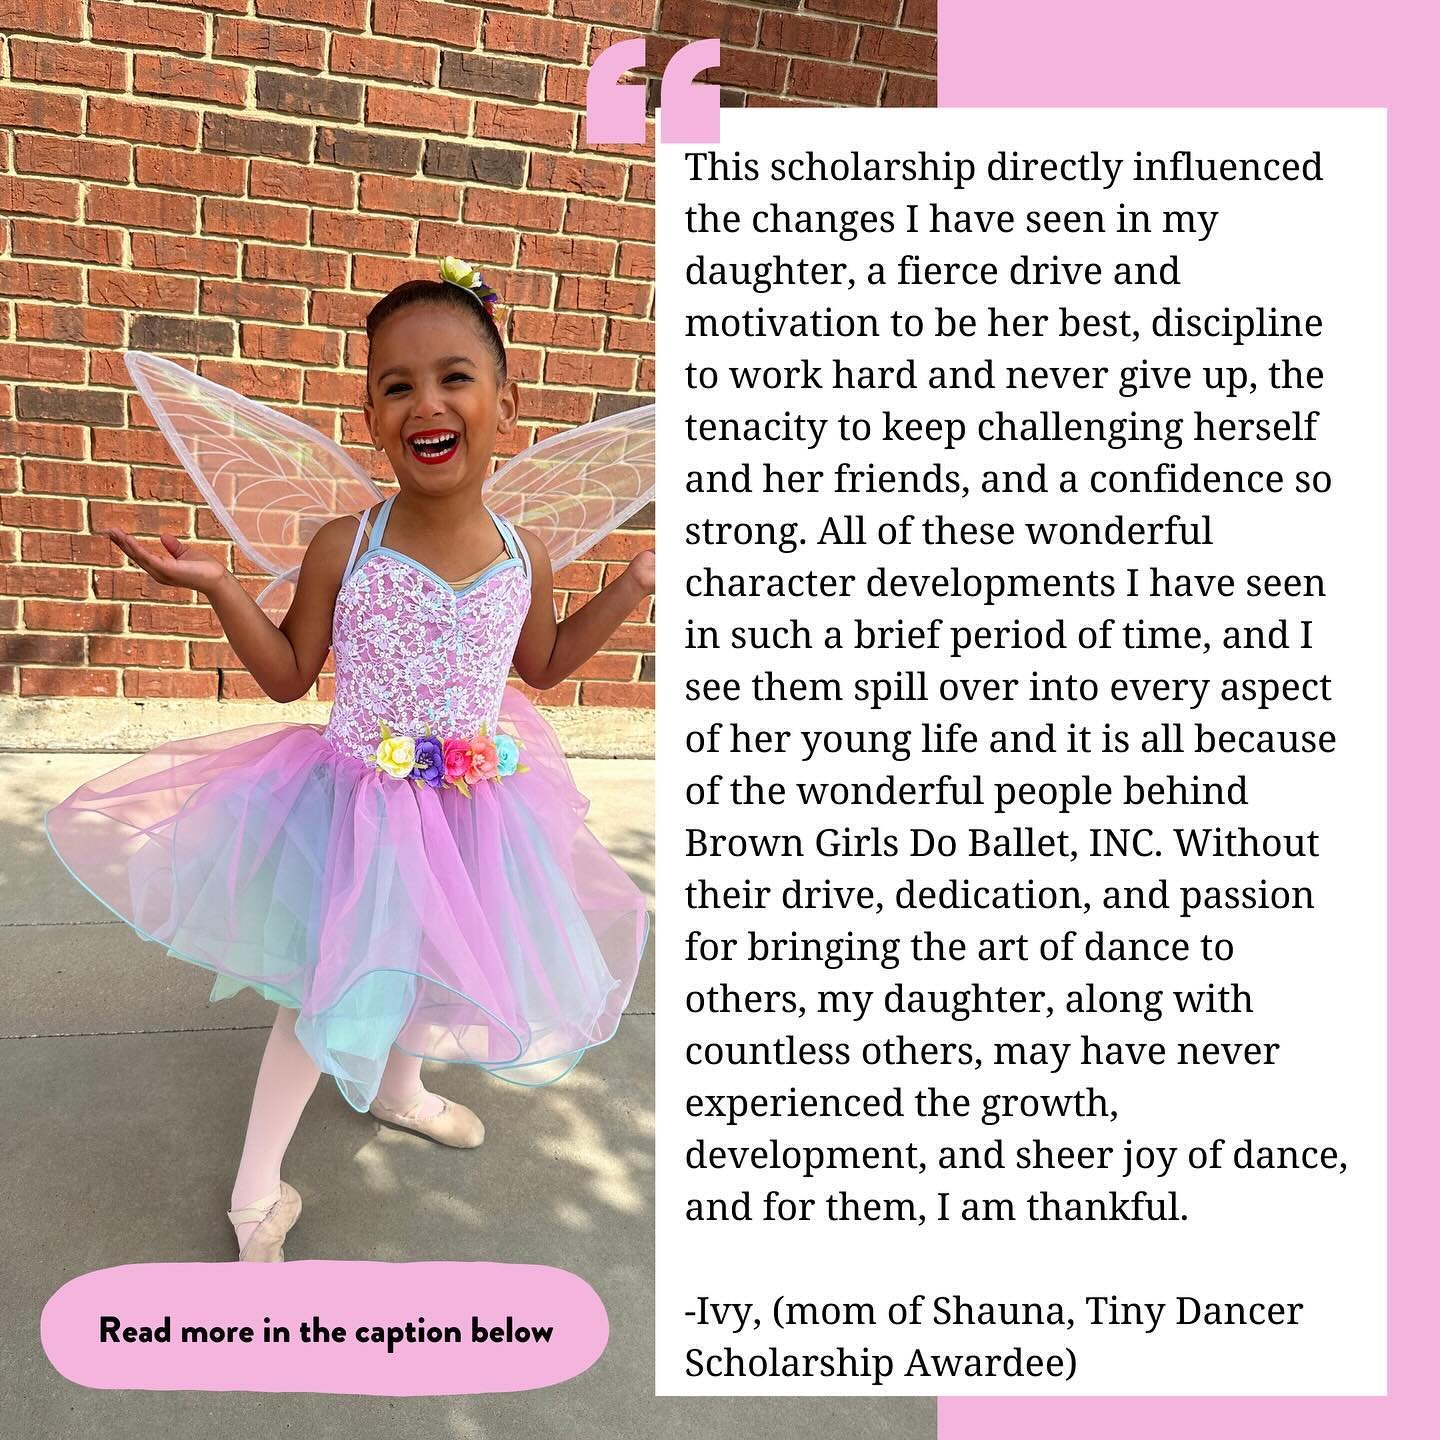 &ldquo;My daughter, Shauna, was selected as a recipient of the Tiny Dancer Scholarship Award for the 2022-2023 year. My family and I were&nbsp;absolutely&nbsp;ecstatic to learn of this&nbsp;amazing&nbsp;opportunity for her. At the time of the award, 